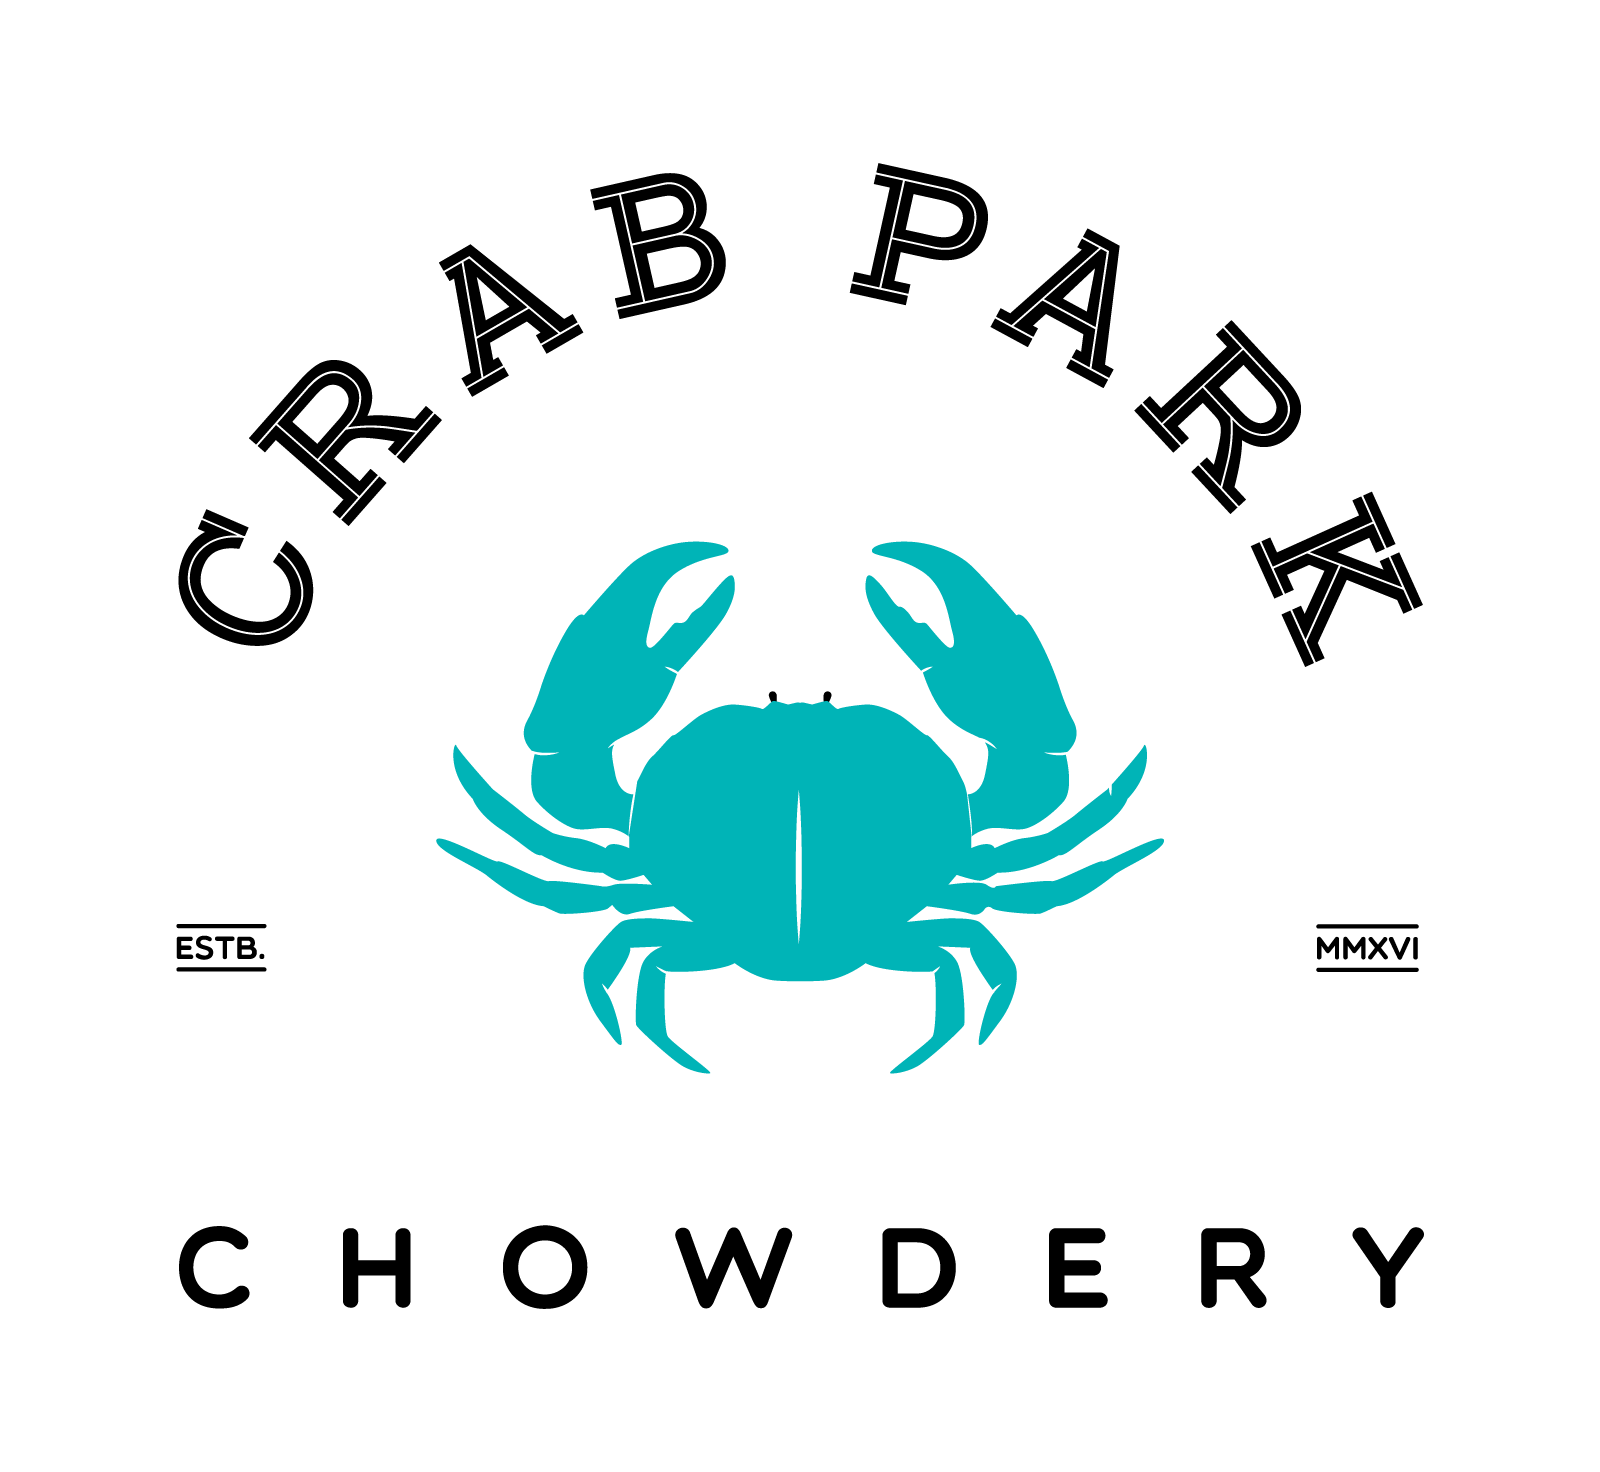 Crab Logo - Chowder Bread Bowl. Lobster Roll Vancouver. Grilled Cheese Sandwich